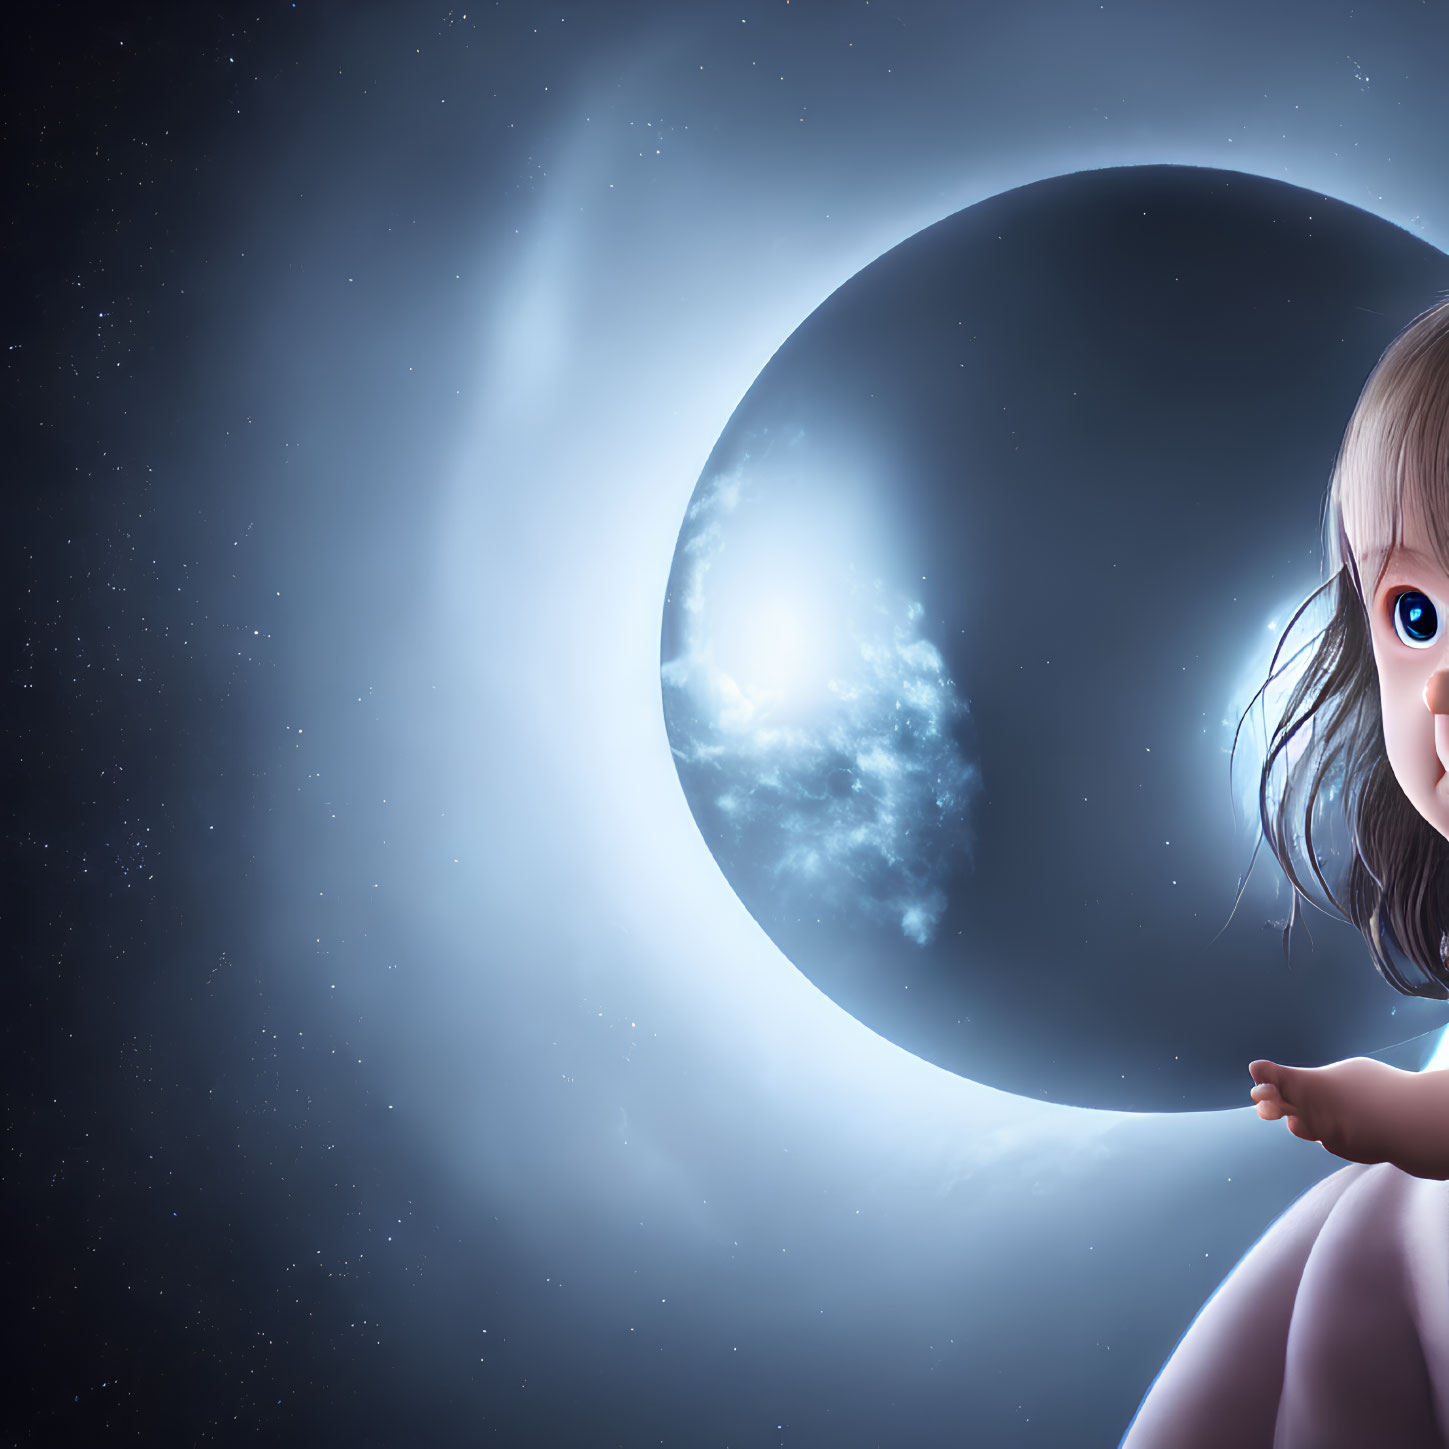 Toddler on Dark Moon with Celestial Background and Blue Nebulae